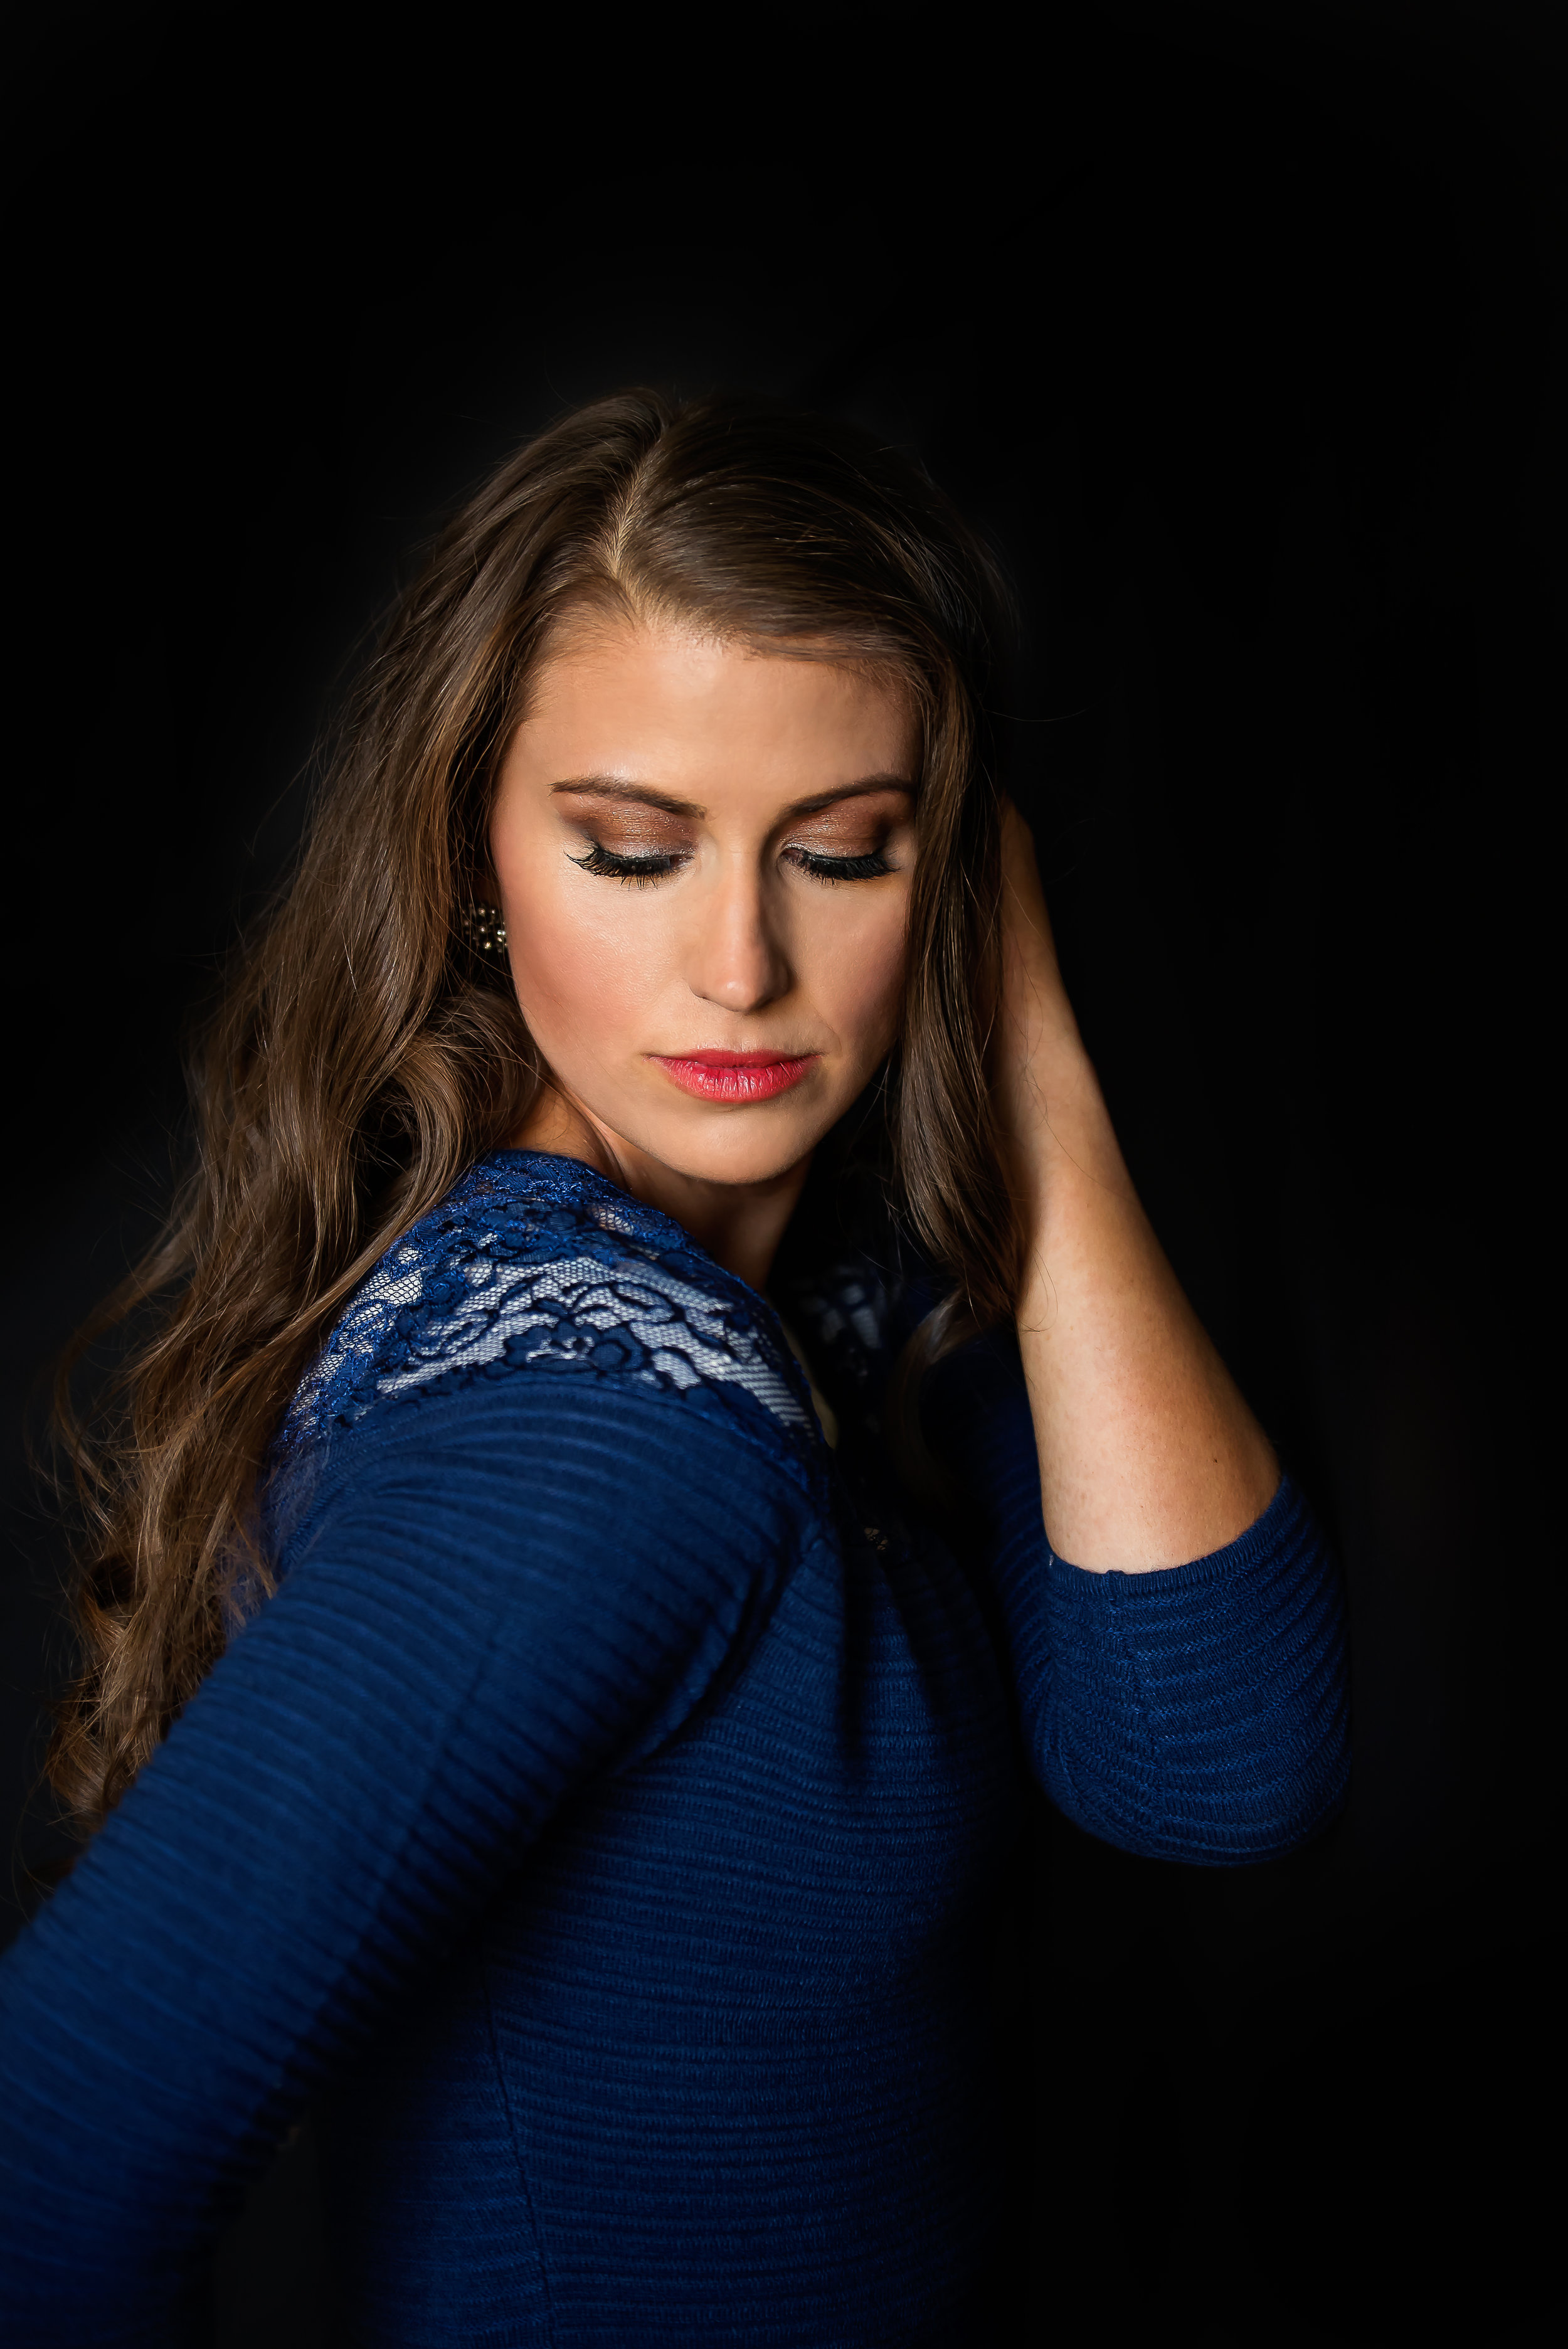  Black background with woman in blue sweater looking down over her shoulder. 